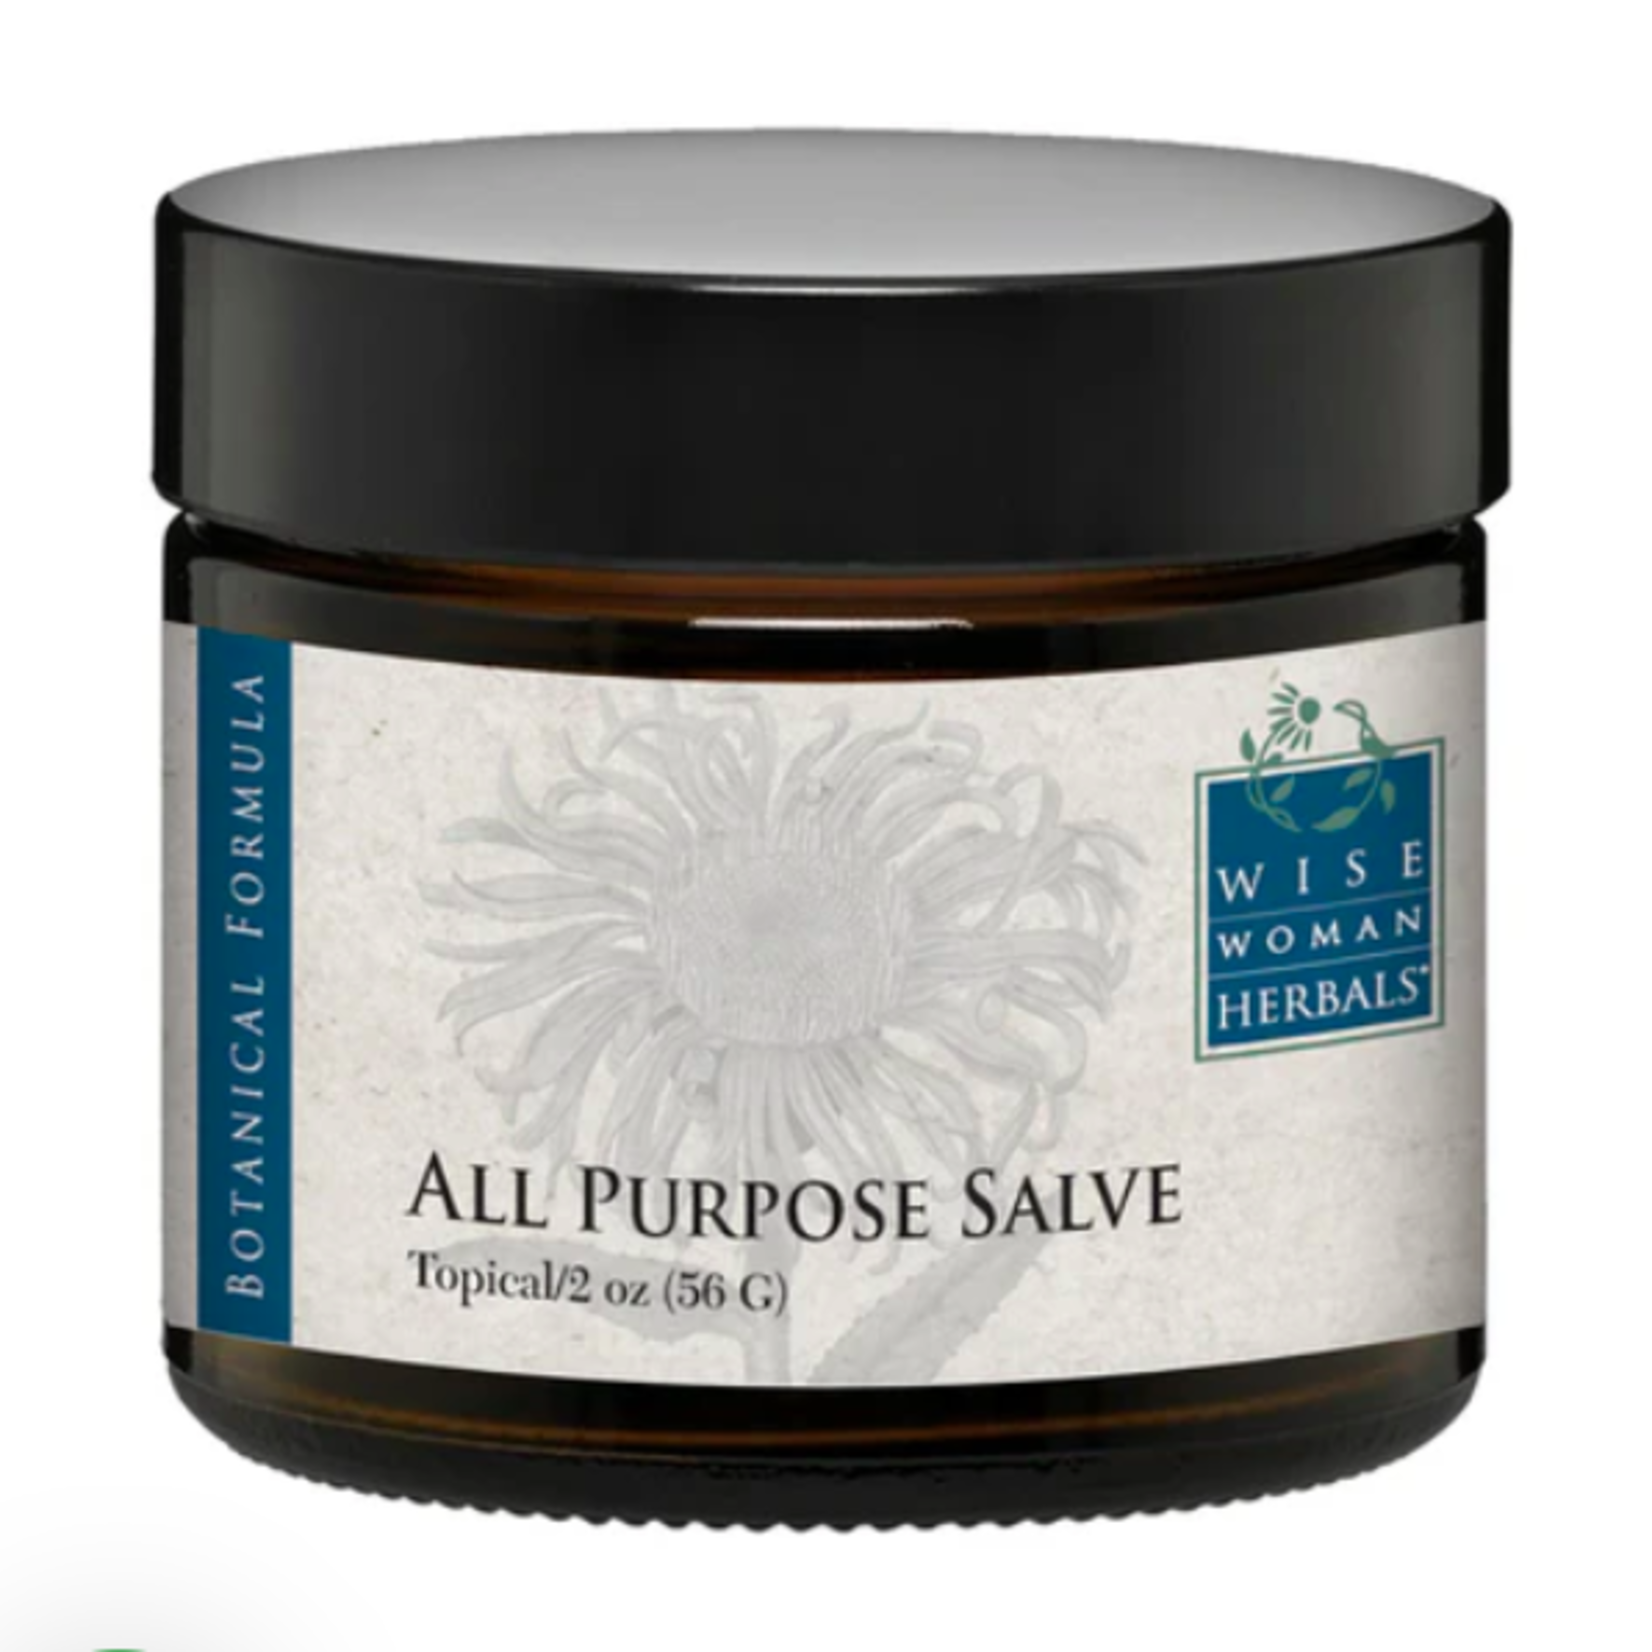 All Purpose Salve (Wise Woman Herbals)